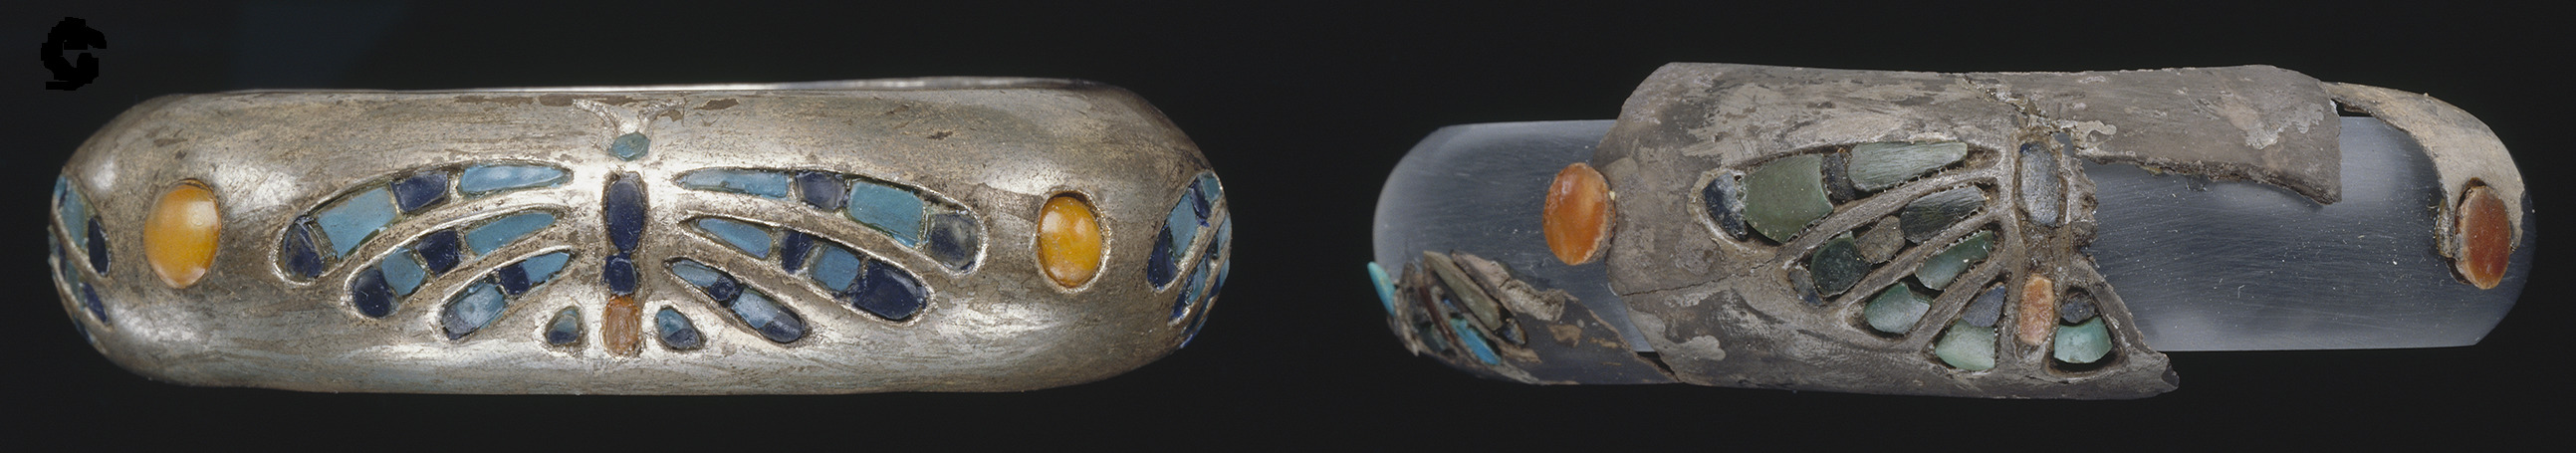 A bracelet (right) in the Museum of Fine Arts, Boston, MFA 47.1700 showing a butterfly inlaid with turquoise, lapis lazuli and carnelian. The bracelet on the left is an electrotype reproduction made in 1947, MFA 52.1837 (Harvard University—Boston Museum of Fine Arts Expedition; Photographs © May 2023 Museum of Fine Arts, Boston)